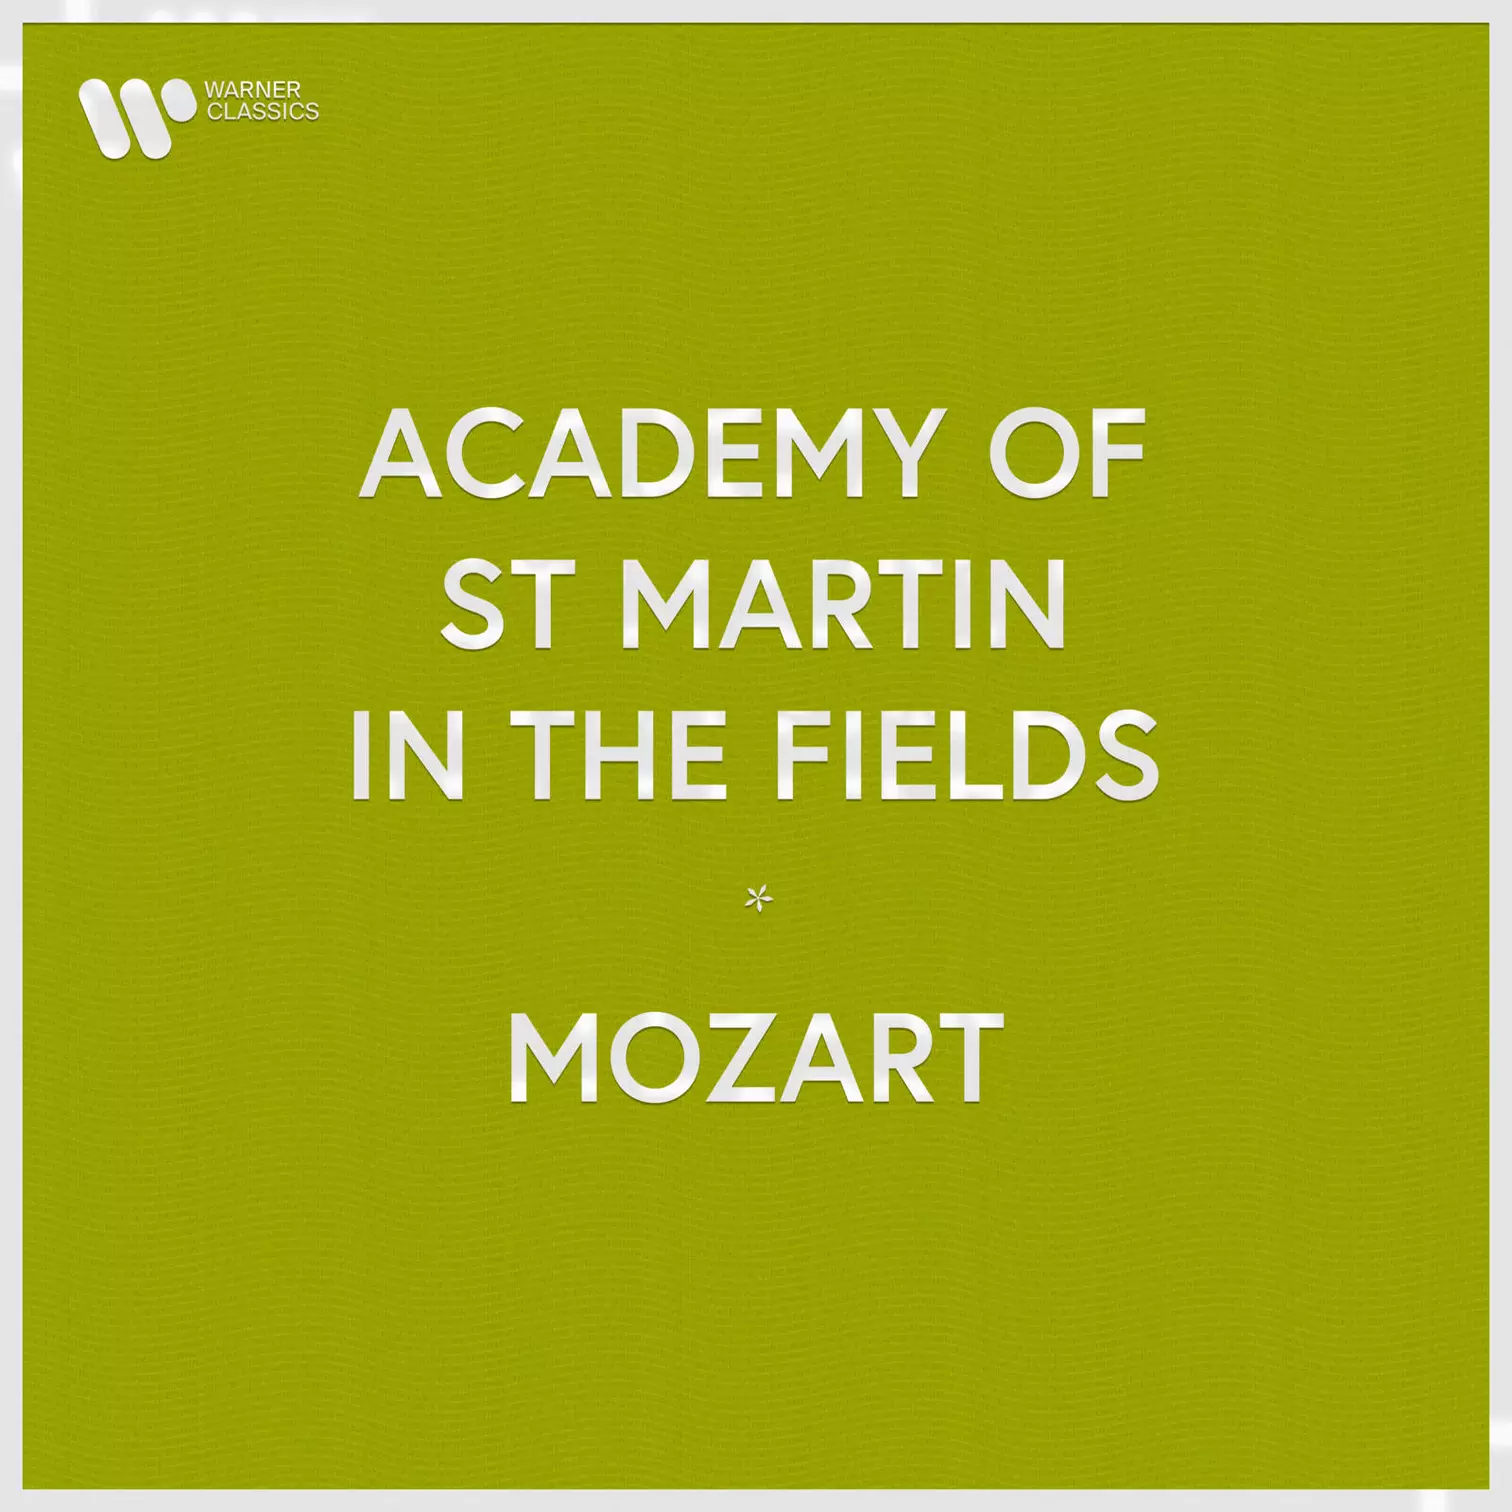 Academy of St Martin in the Fields - Mozart